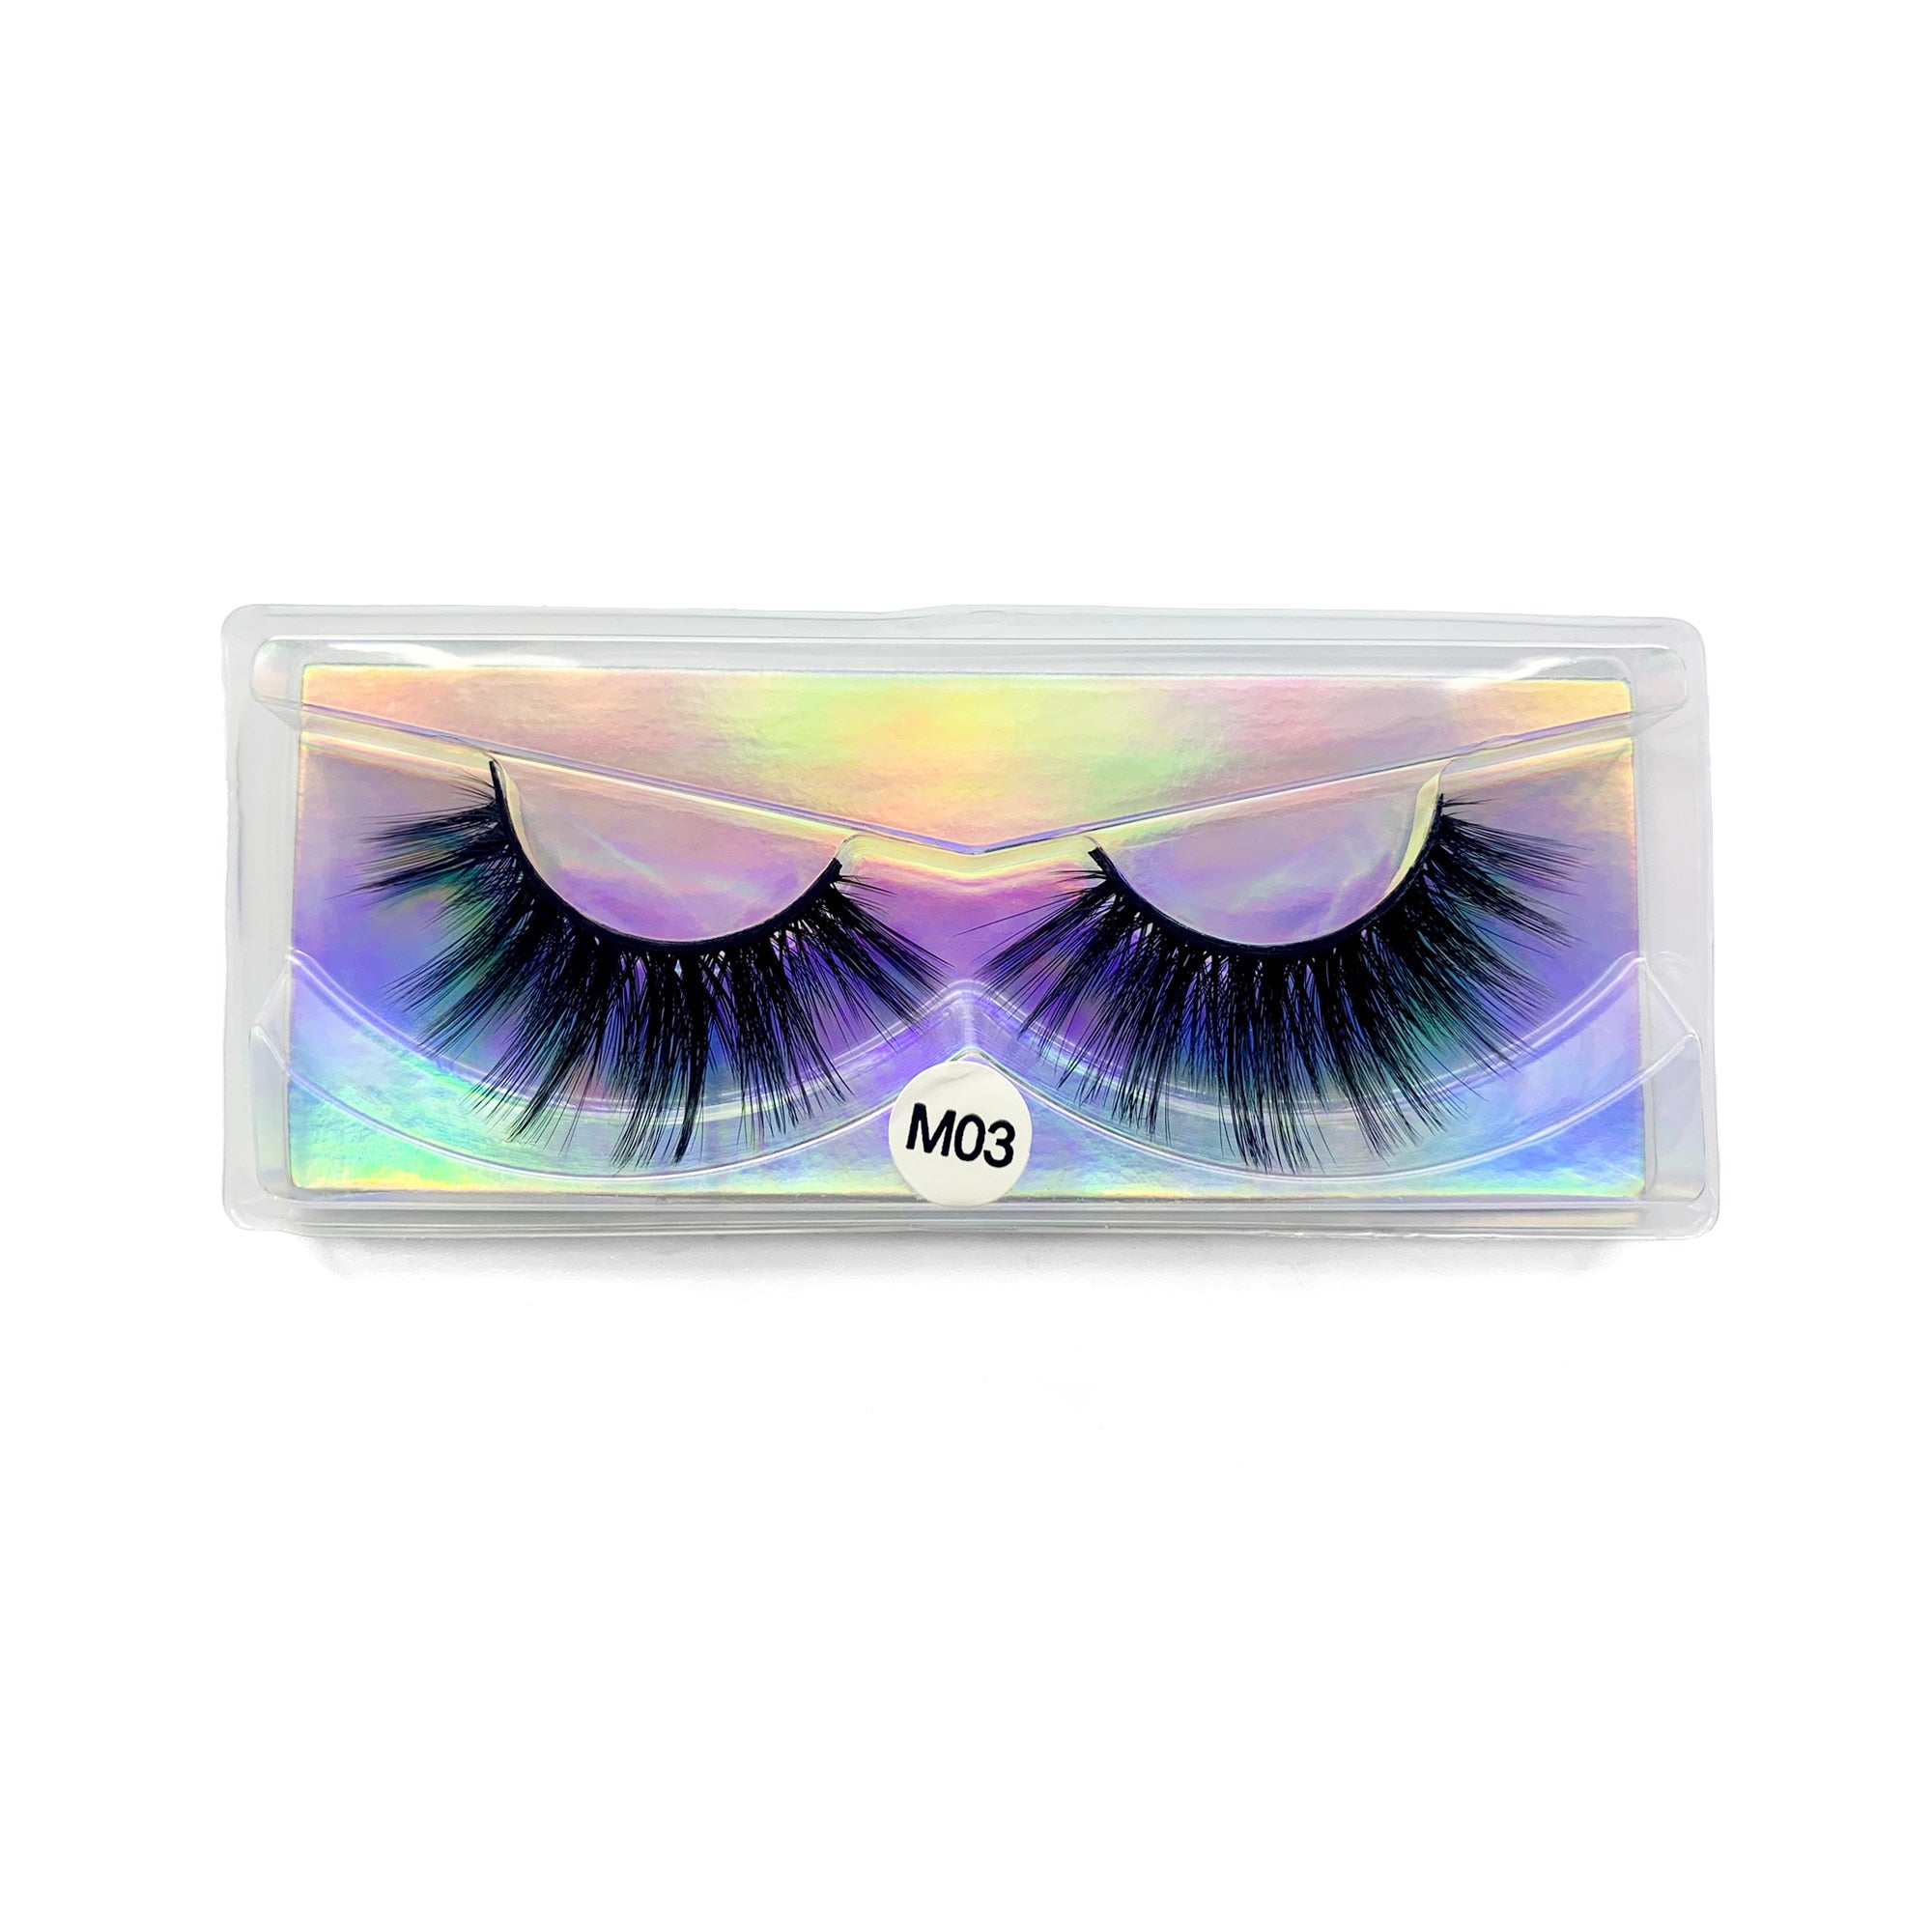 2022 Trend Mixed Lashes Sets